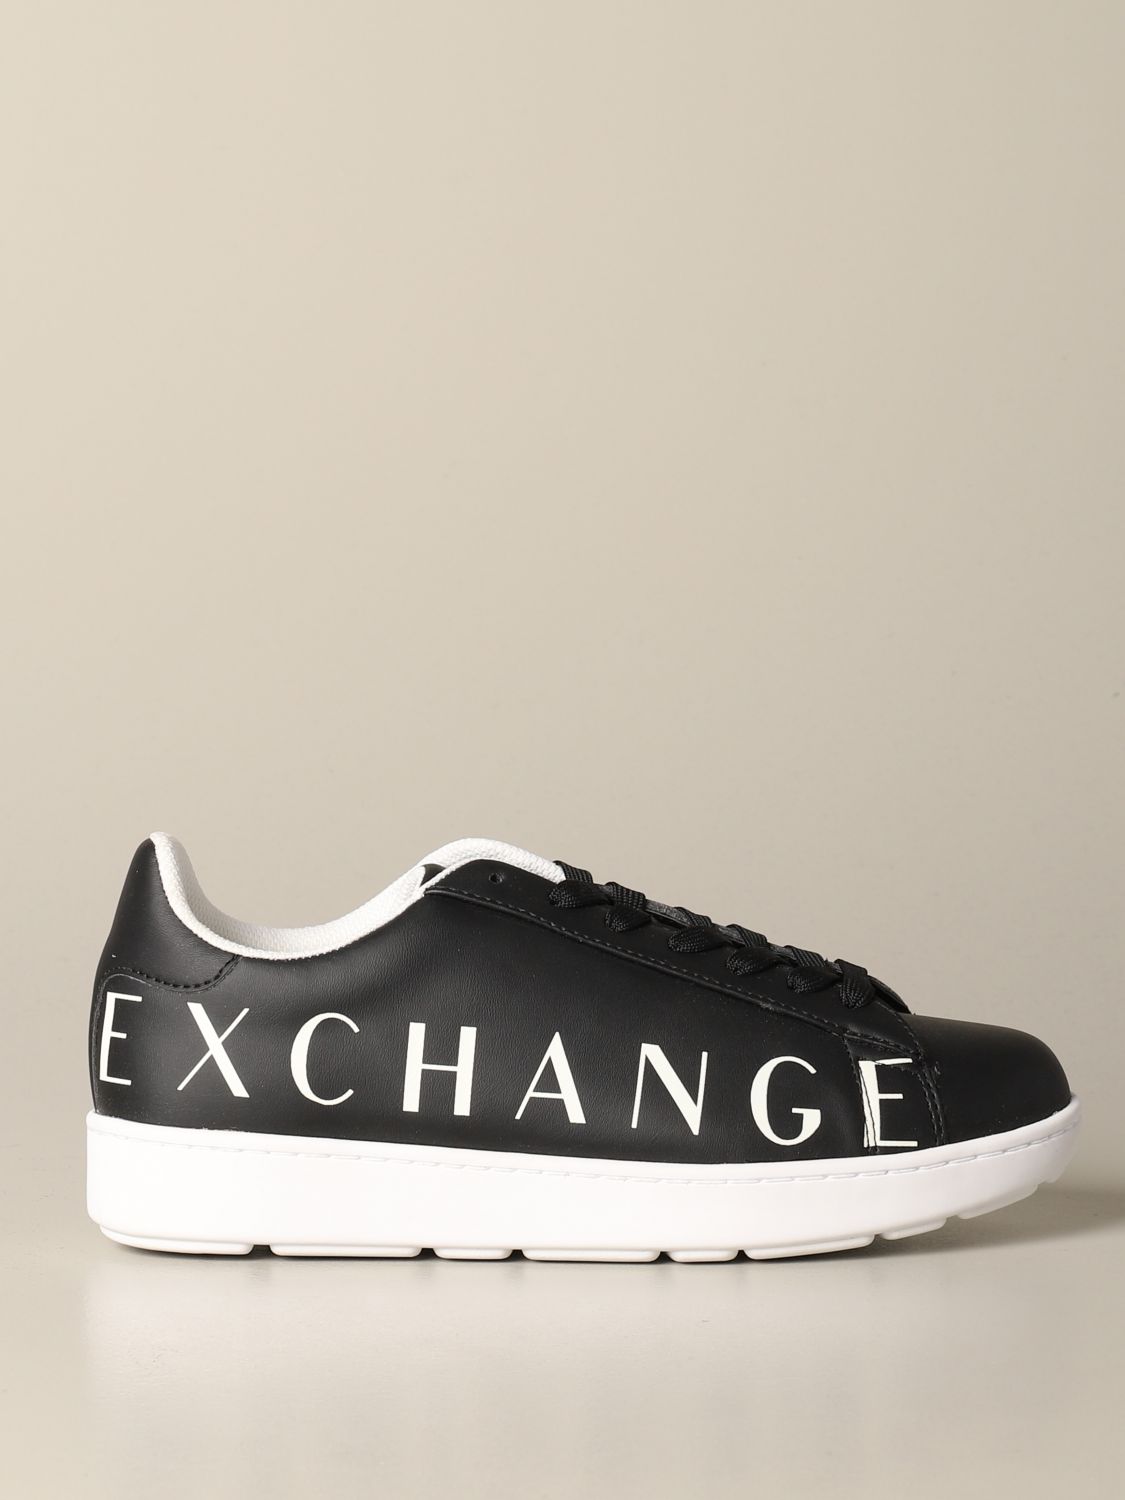 mølle afstemning assimilation Armani Exchange Outlet: sneakers in leather with logo - Black | Armani  Exchange sneakers XUX033 XV186 online on GIGLIO.COM